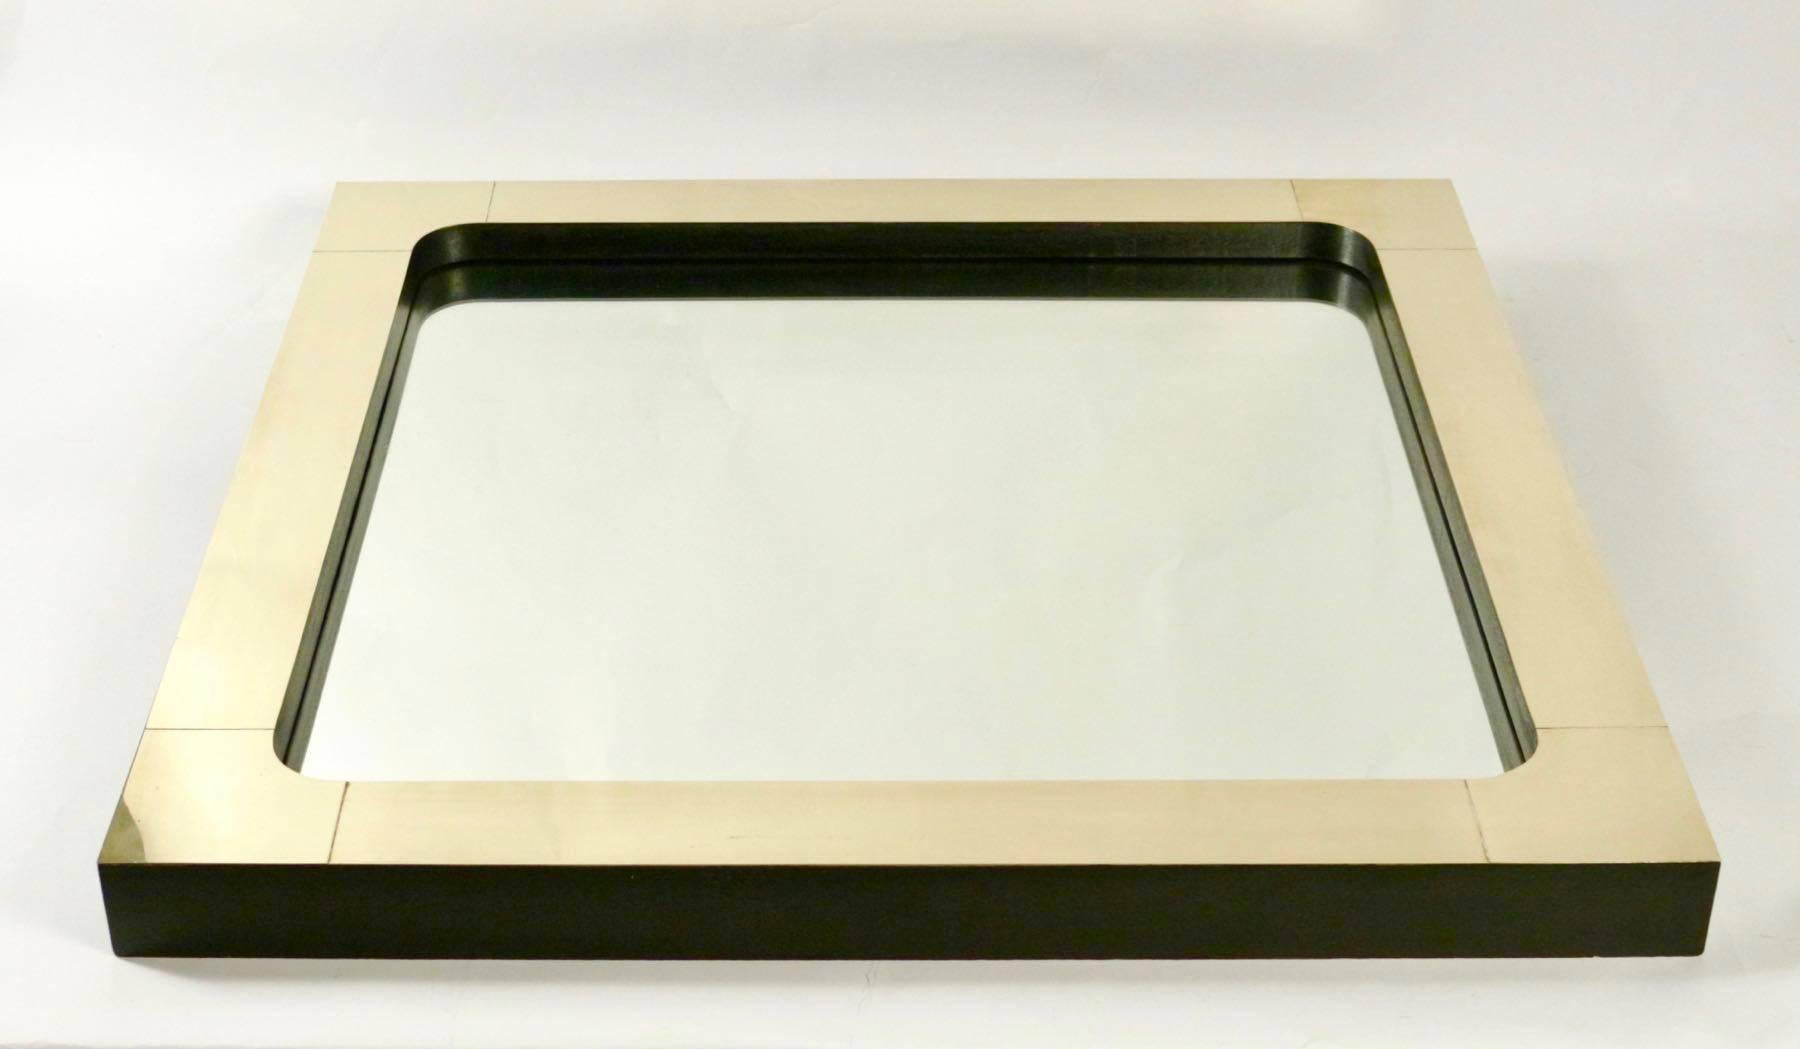 1970s square brass and blackened wood mirror.

The corner of the glass are round. The frame is made of blackened oak which brass plates.